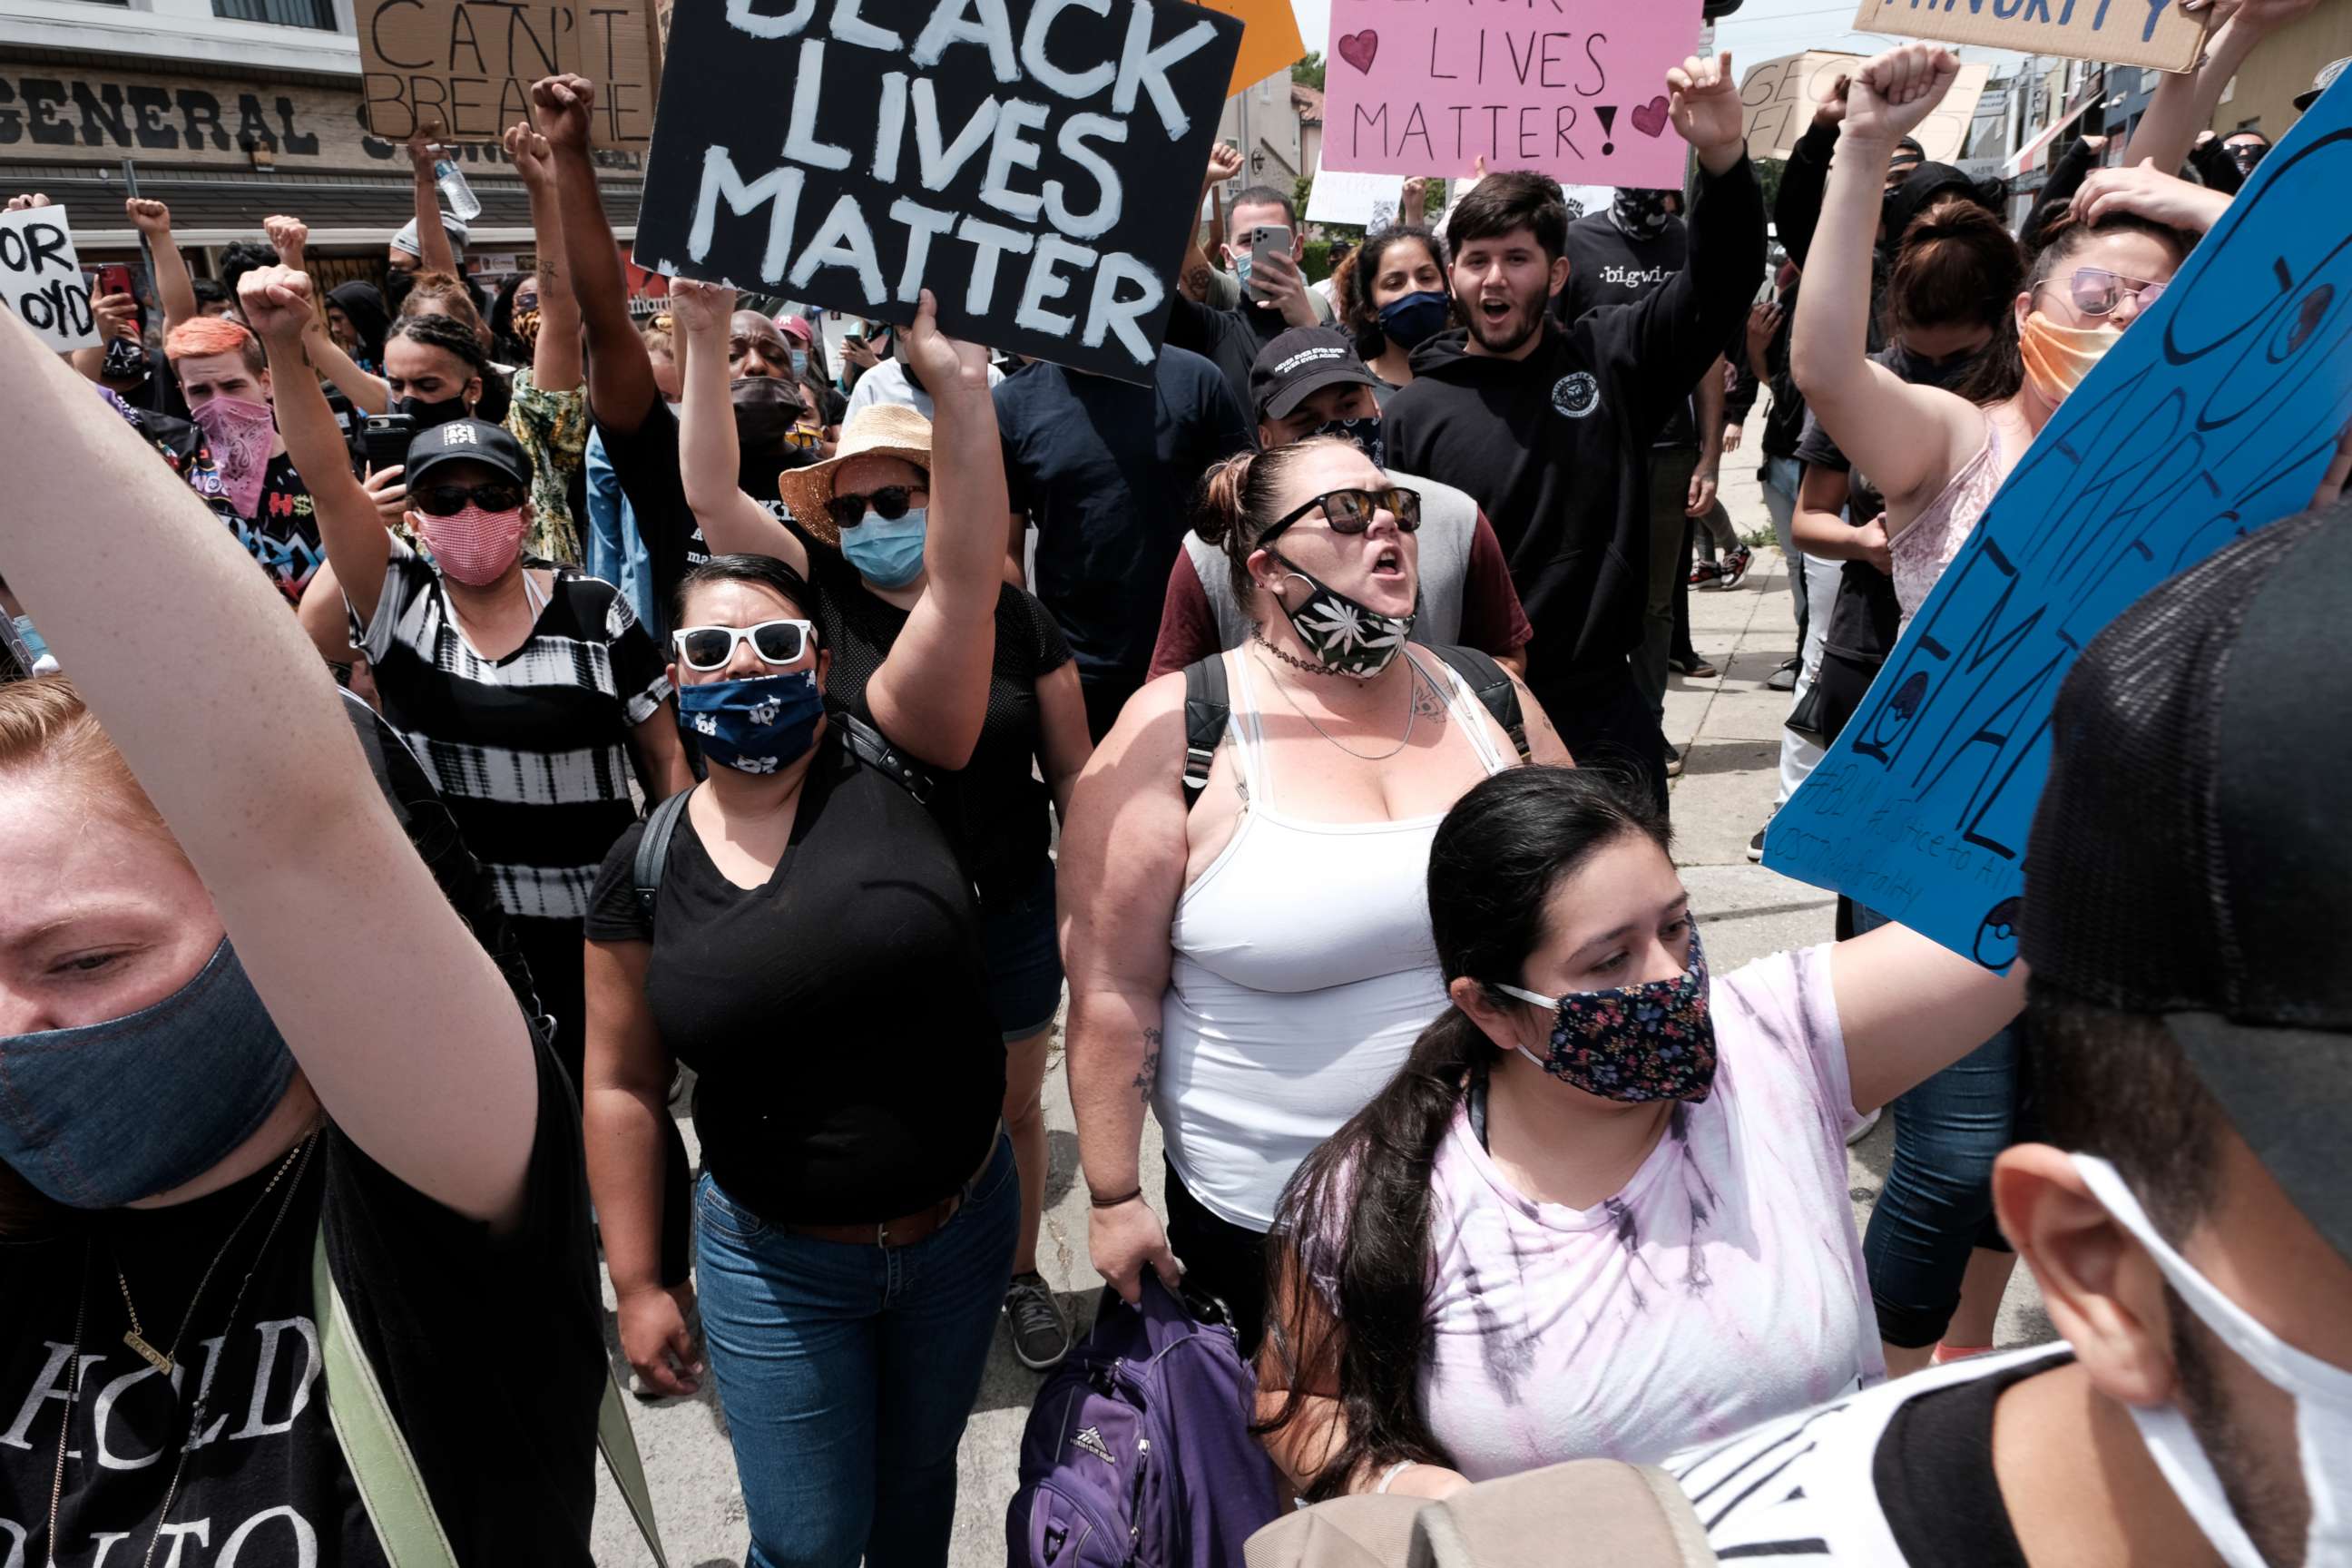 PHOTO: Protesters chant and hold signs during a Black Lives Matter protest on a street corner in Los Angeles, Monday, June 1, 2020. Public health authorities are worried there could be a spike in coronavirus cases as thousands of people march in protests.